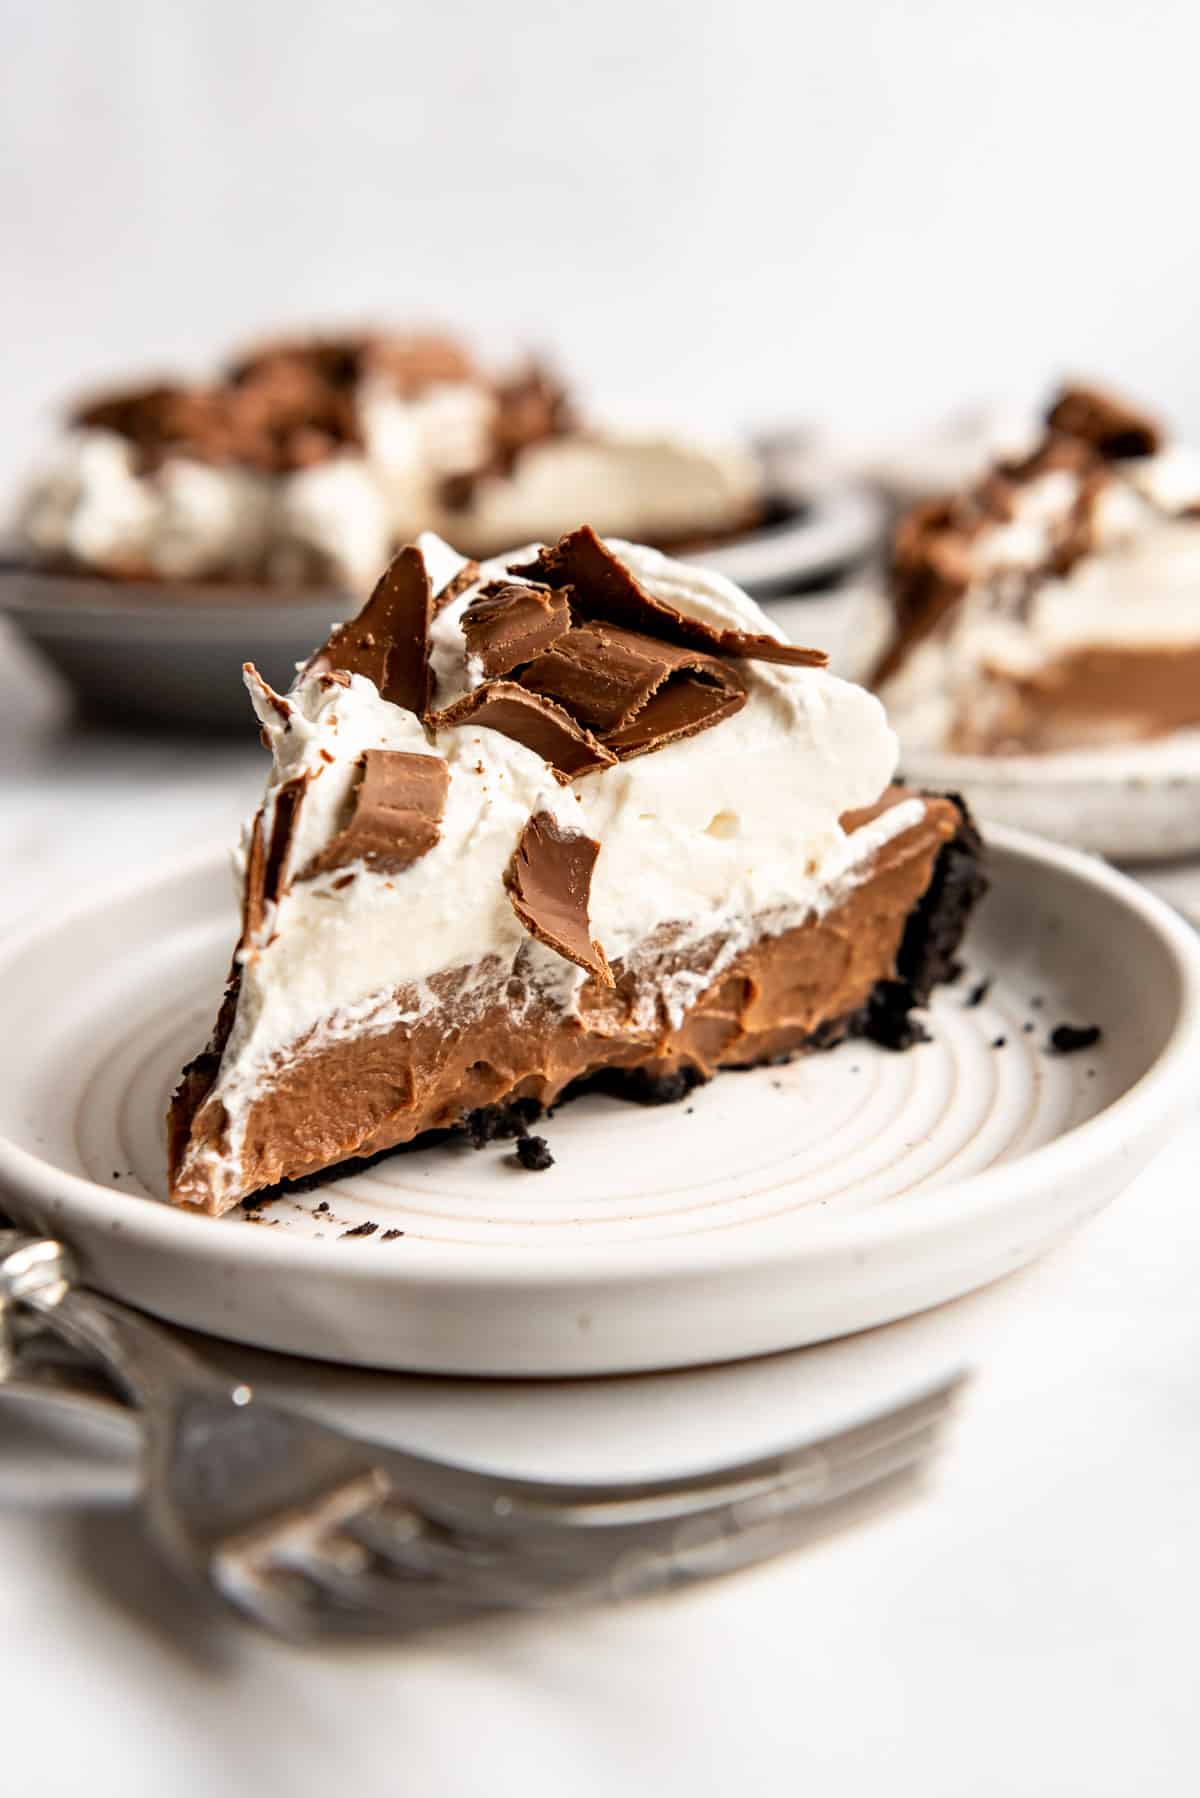 A slice of chocolate pudding pie on a white plate.